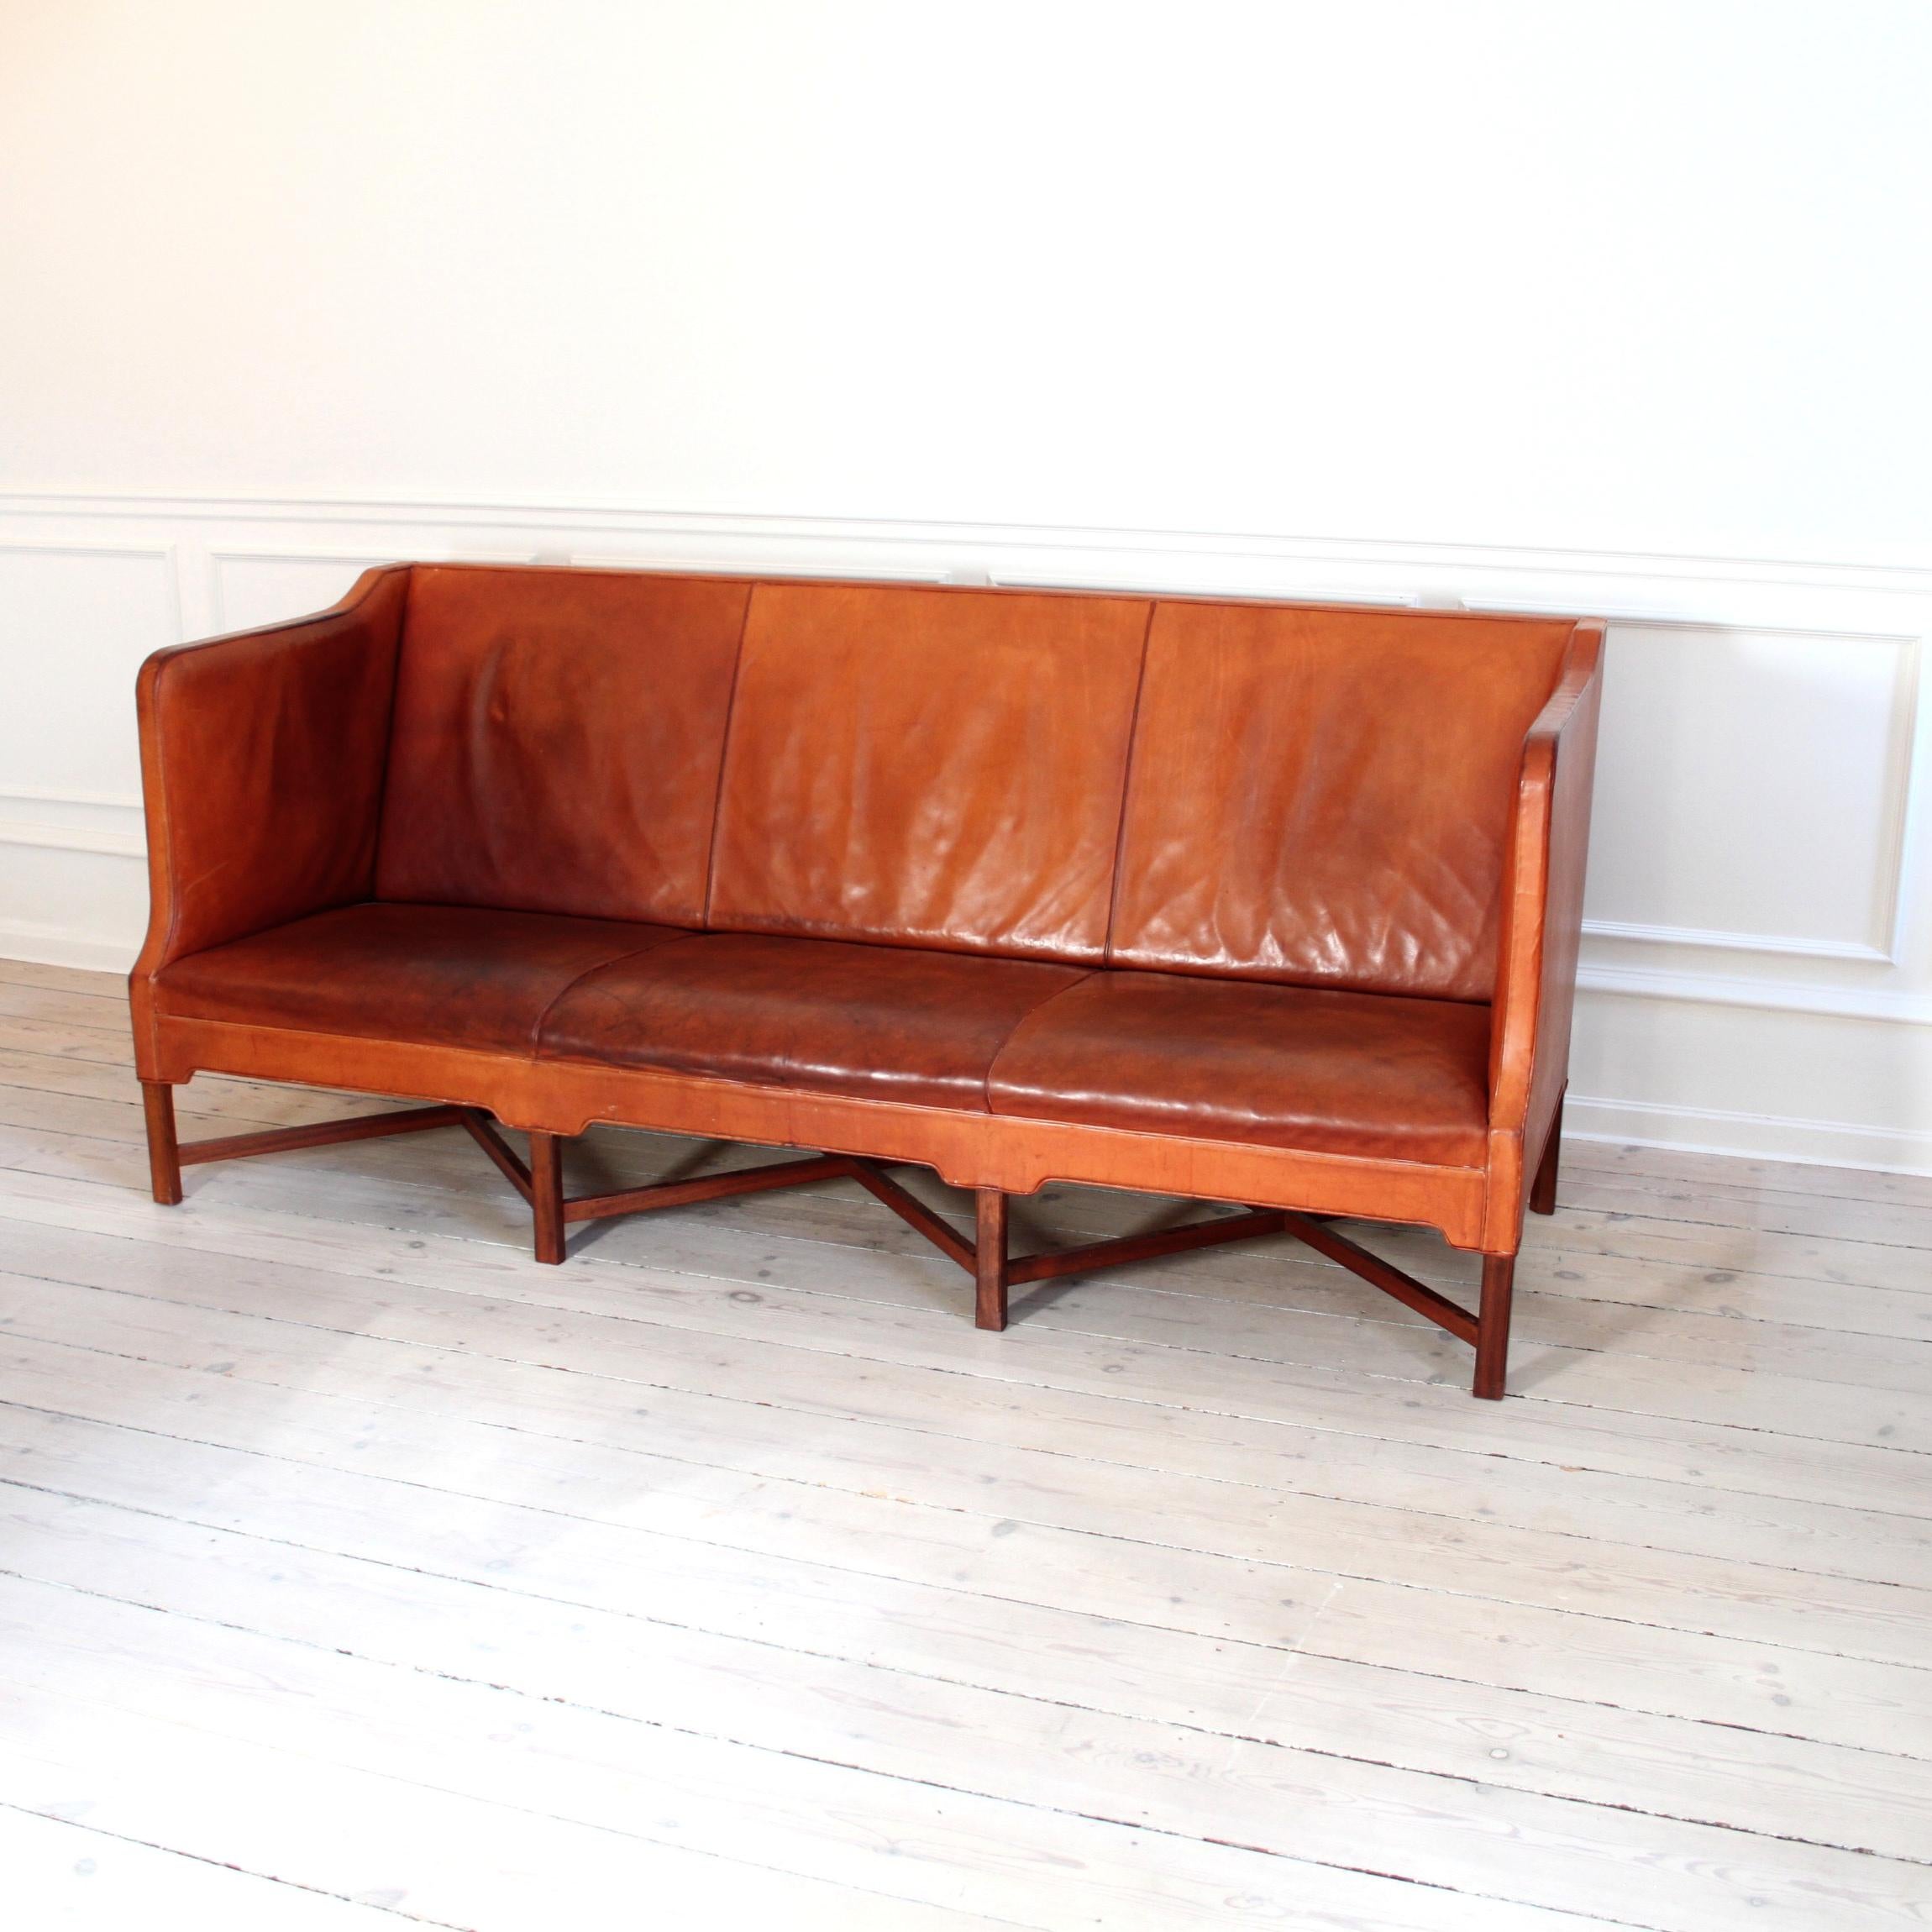 Kaare Klint & Rud Rasmussen Snedkerier, Denmark

The exquisite and rare three-seater X-base sofa, model 4118, by Danish designer Kaare Klint and executed by cabinetmakers Rud. Rasmussen A/S, Copenhagen, Denmark. 

The base consists of eight legs